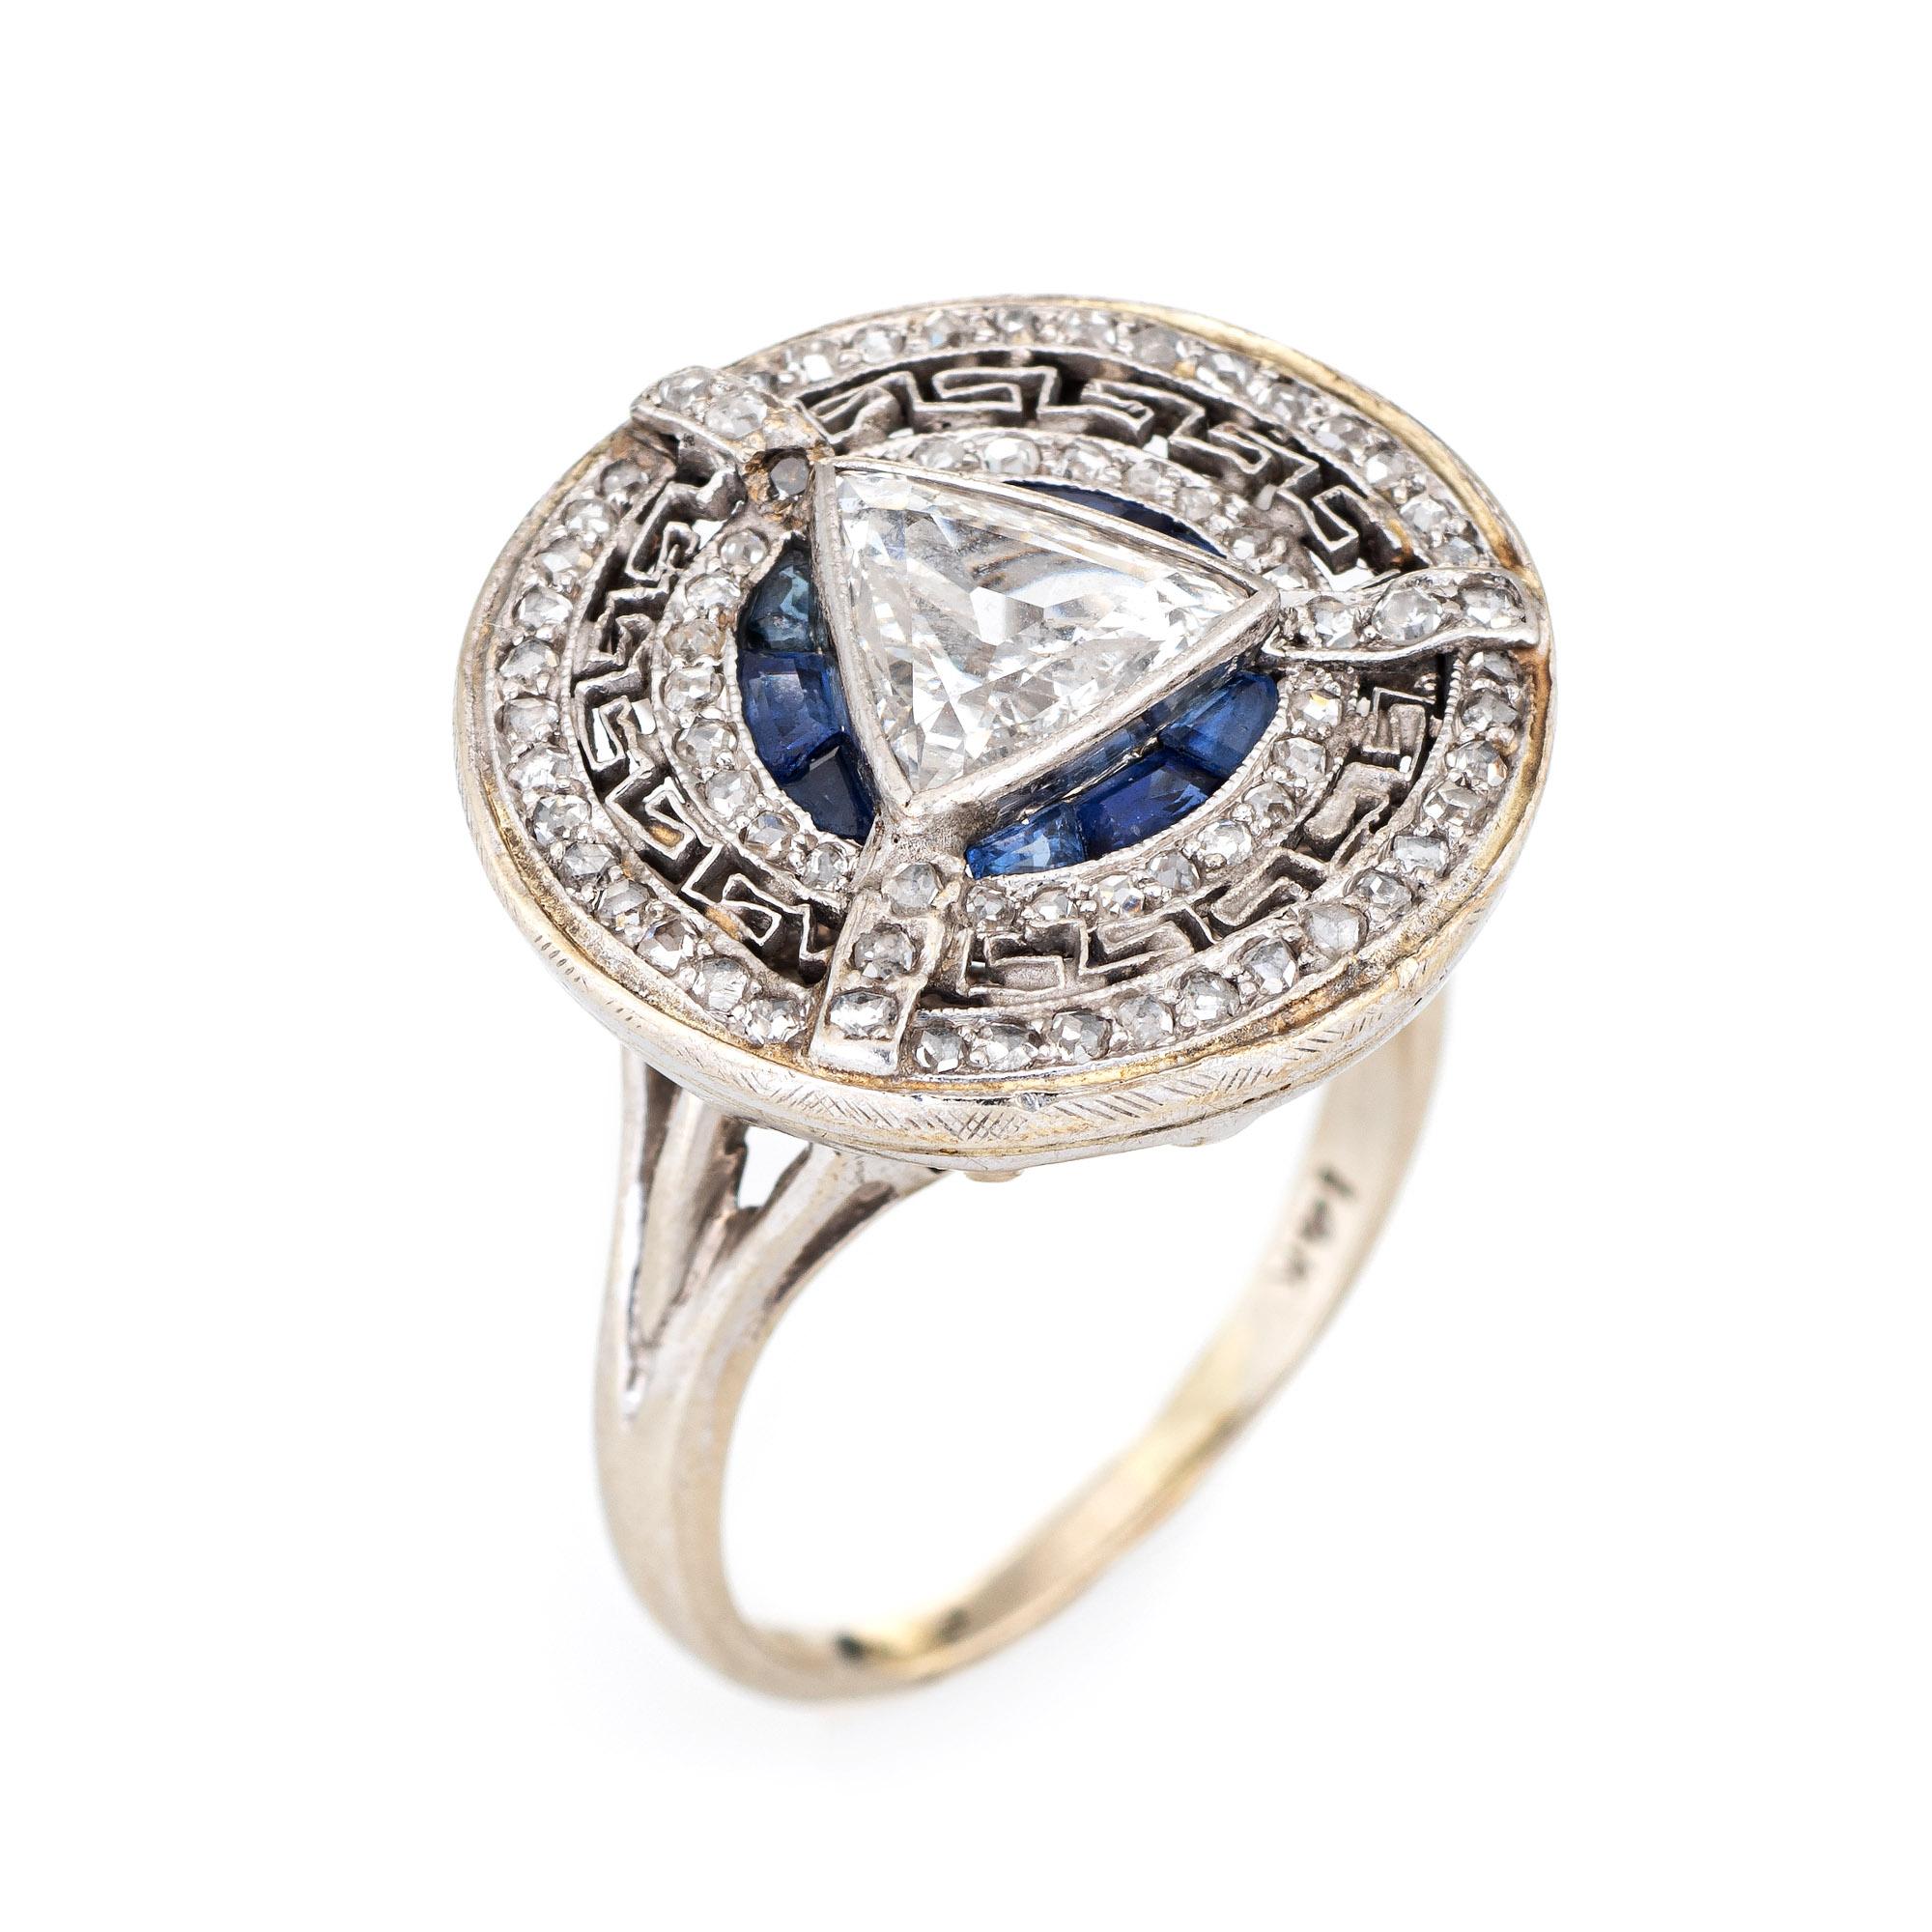 Stylish & finely detailed vintage Art Deco diamond & sapphire ring (circa 1920s to 1930s) crafted in 14k white gold. 

Center set triangle shaped brilliant cut diamond measures 8mm x 2.1mm (estimated at 0.75 carats - F color/SI1 clarity).